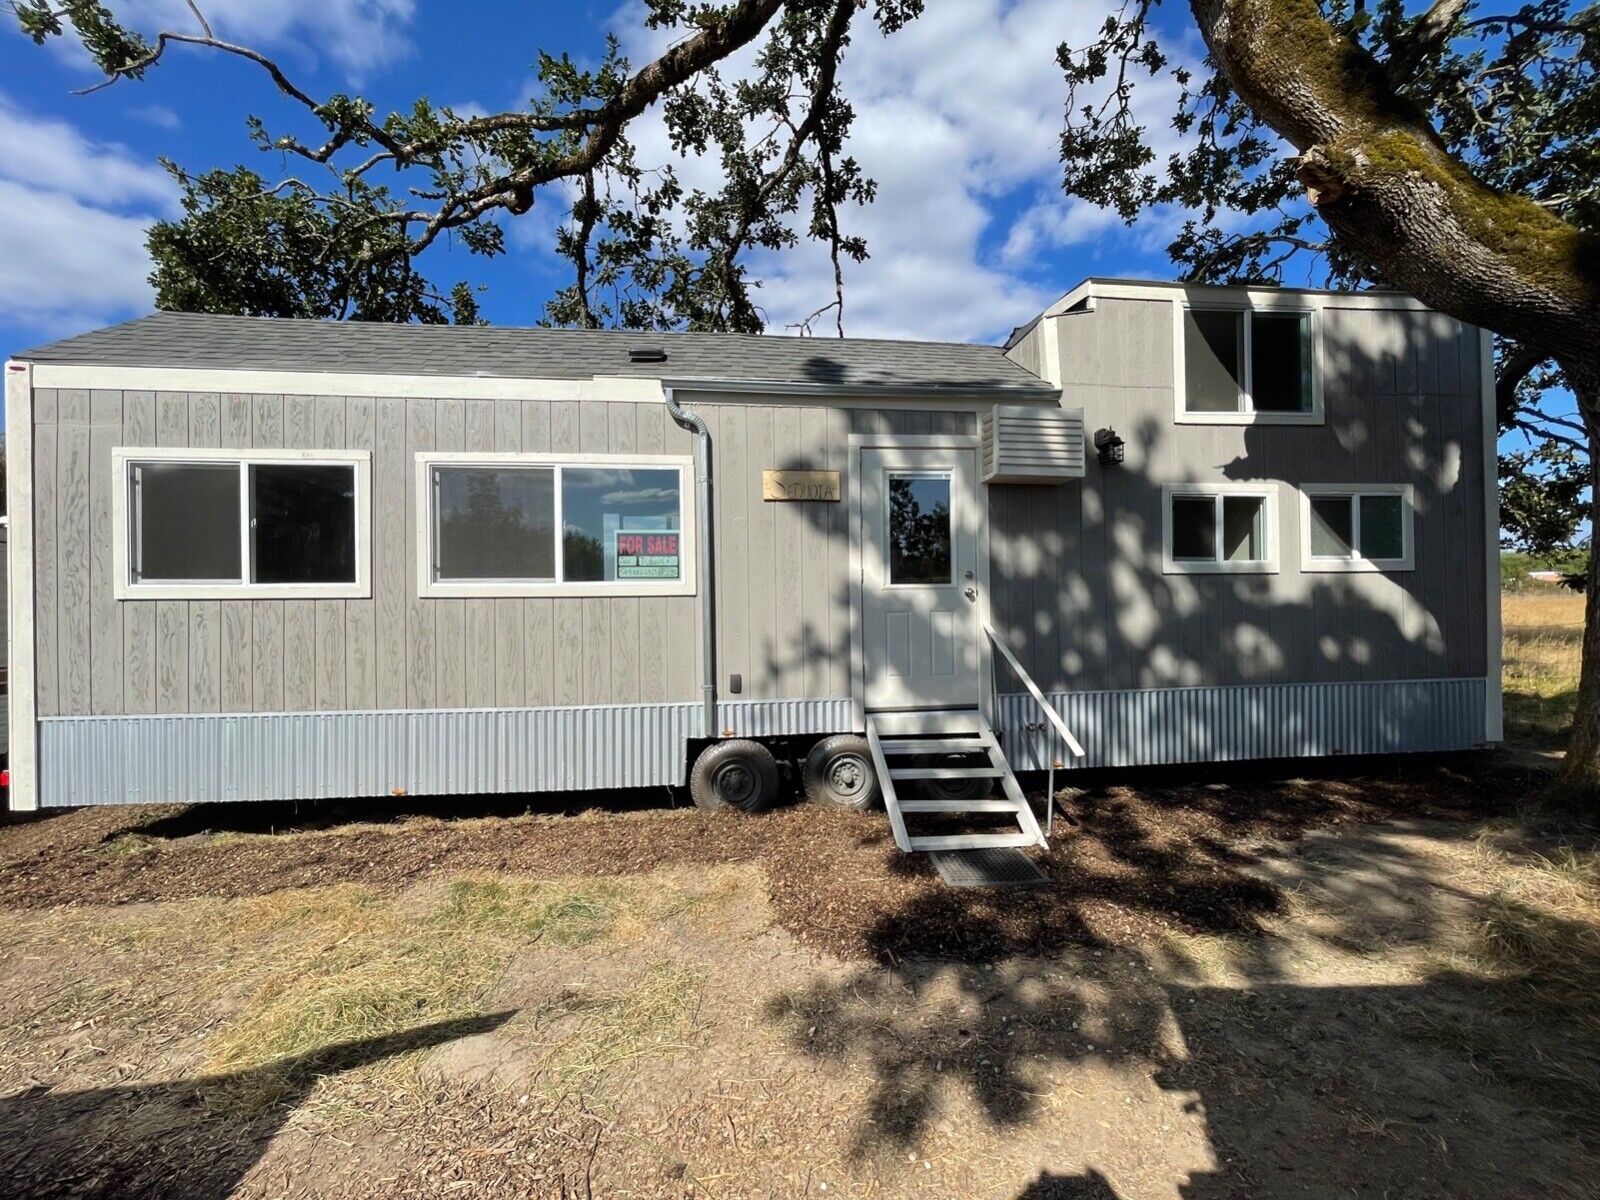 New 2021 Sequoia Tinny House on wheels $92,911.70 OBO 2Bed 1Bath